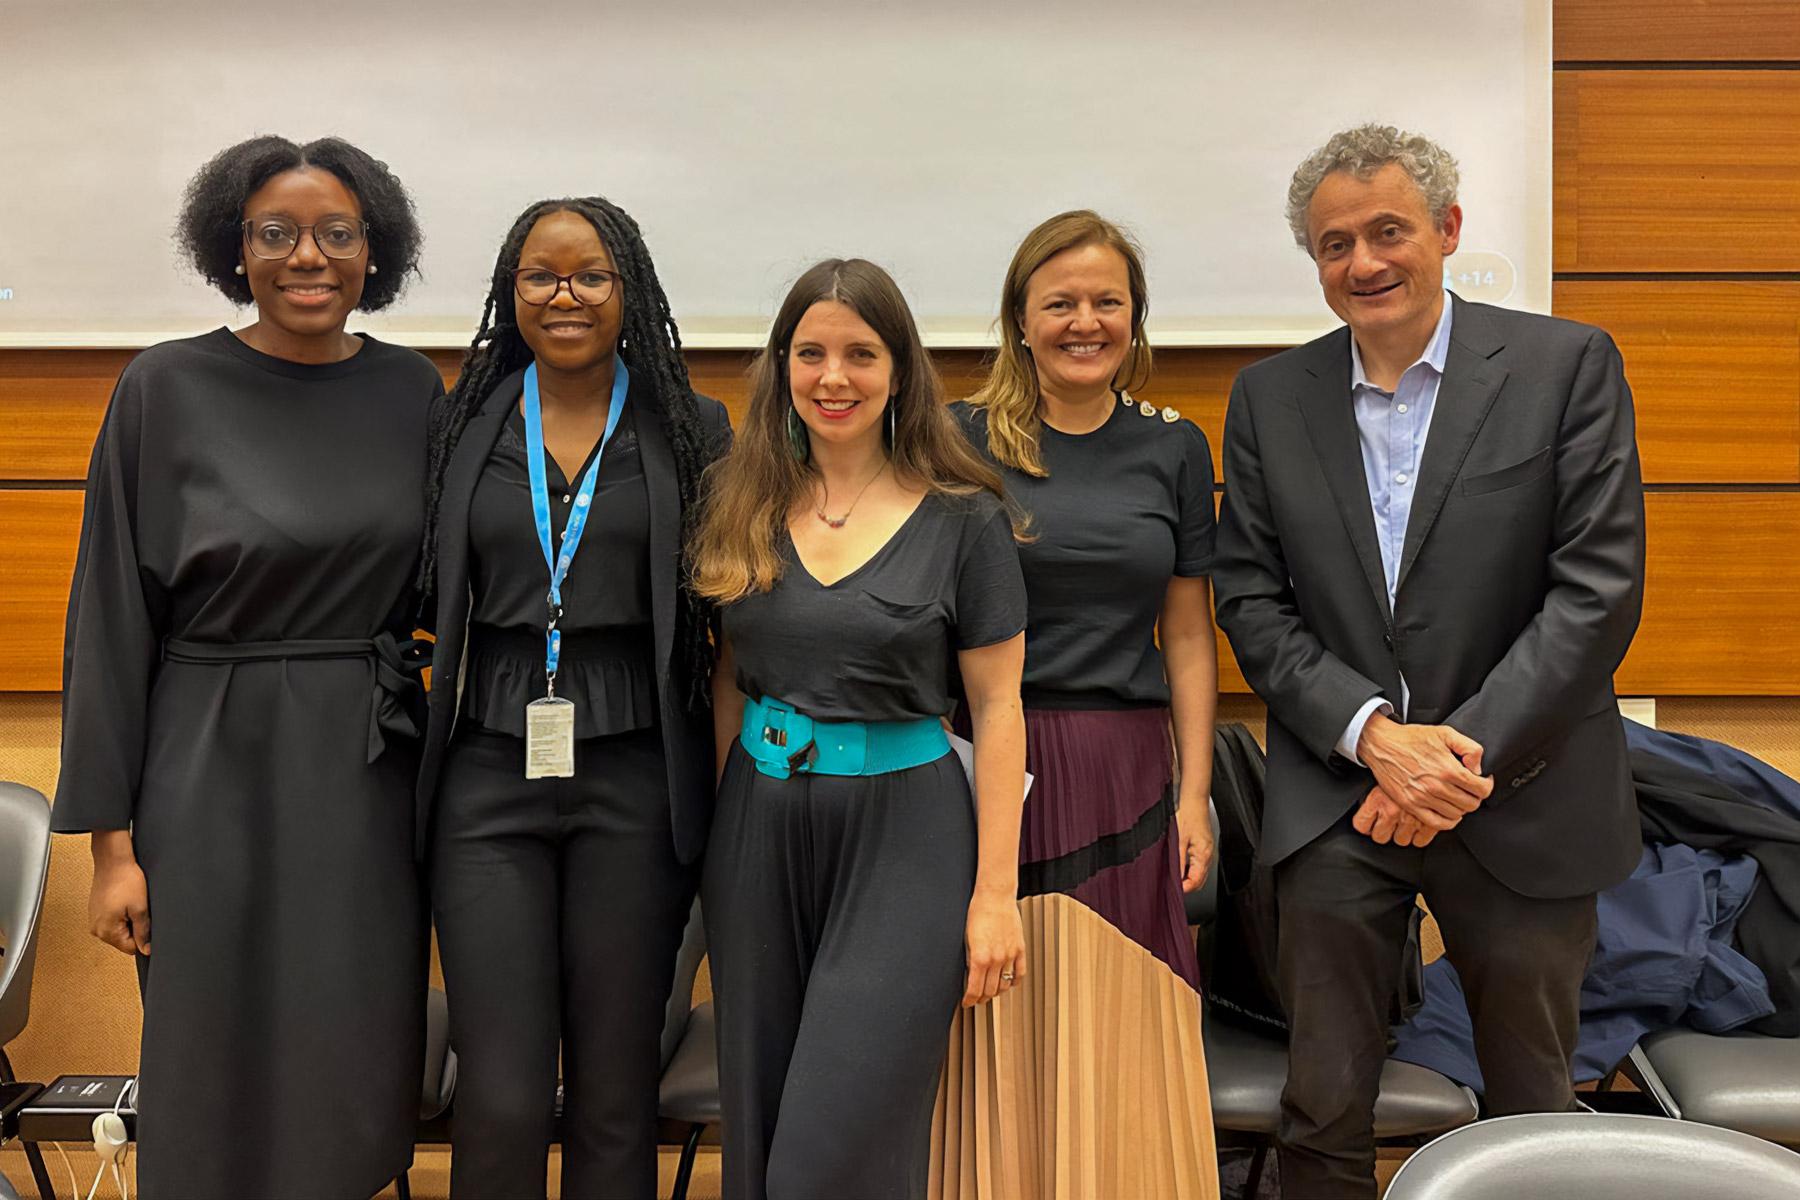 Panelists with moderator Sikhonzile Ndlovu, LWF’s Senior Advocacy Officer for Gender Justice, at the 20 June event on the gendered impacts of violent conflict and war. Photo: WCC/E. Lehoux